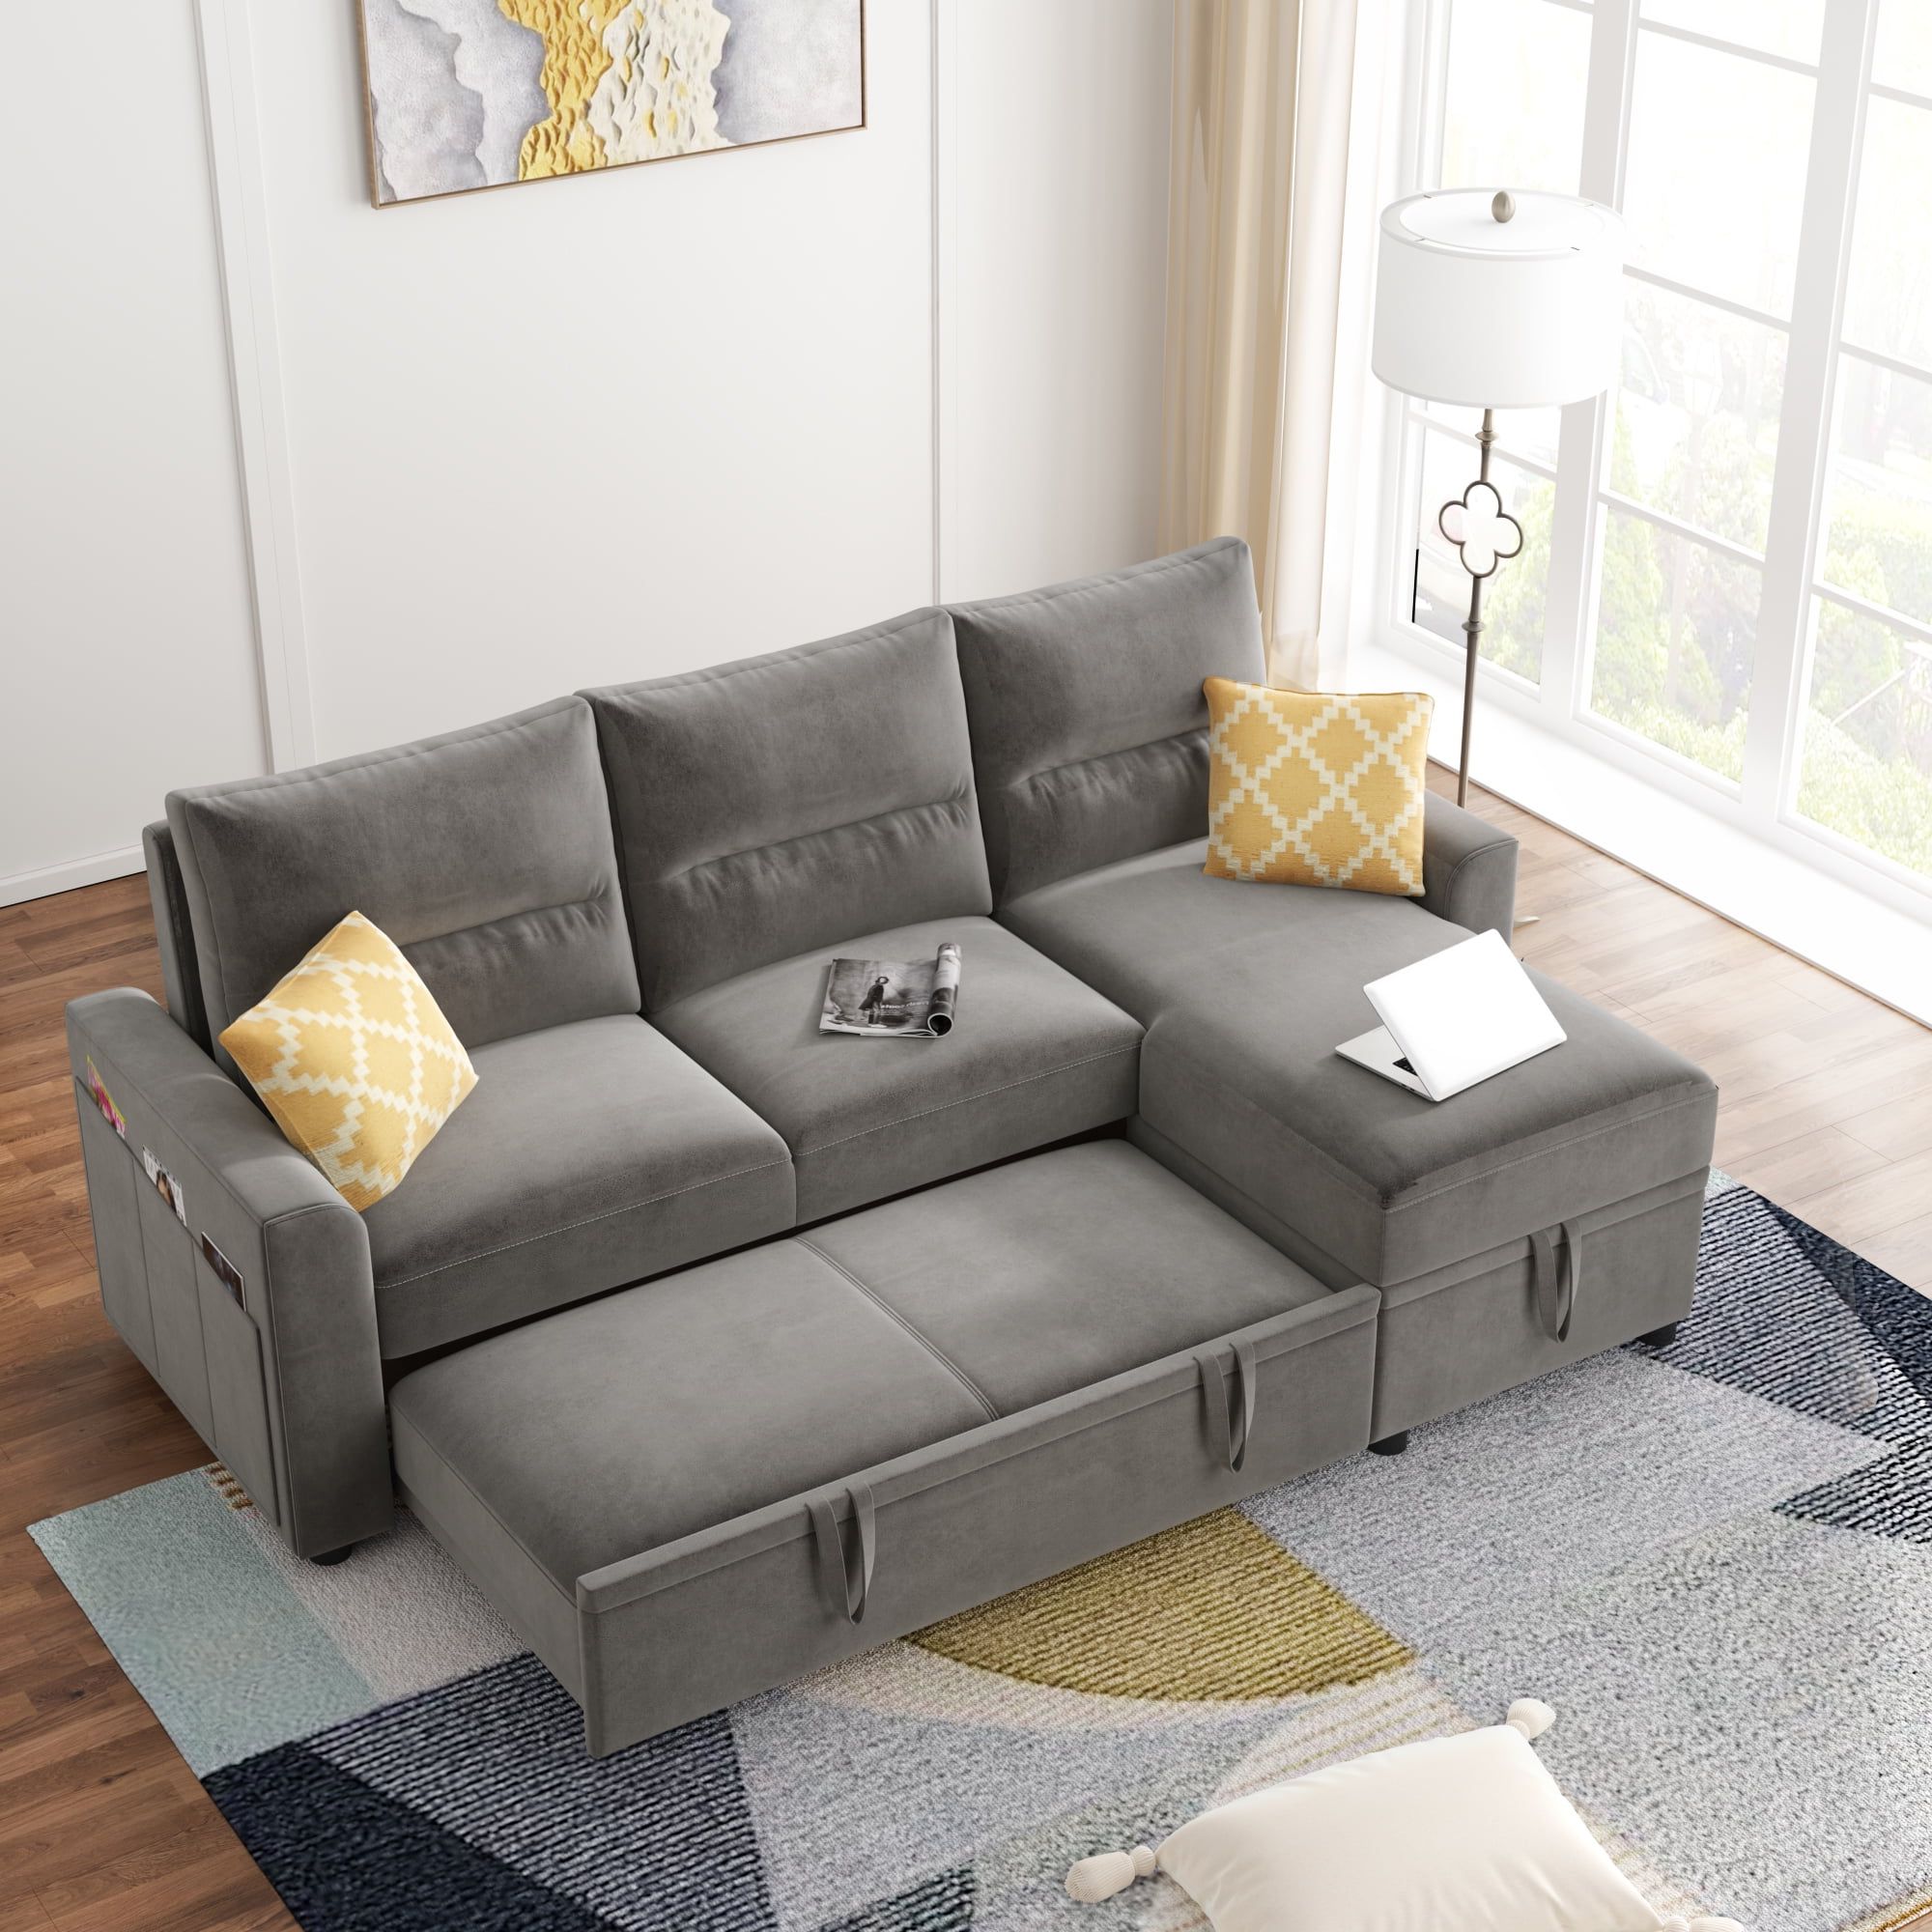 Widely Used Upholstered Sectional Sleeper Sofa, Segmart  (View 9 of 15)